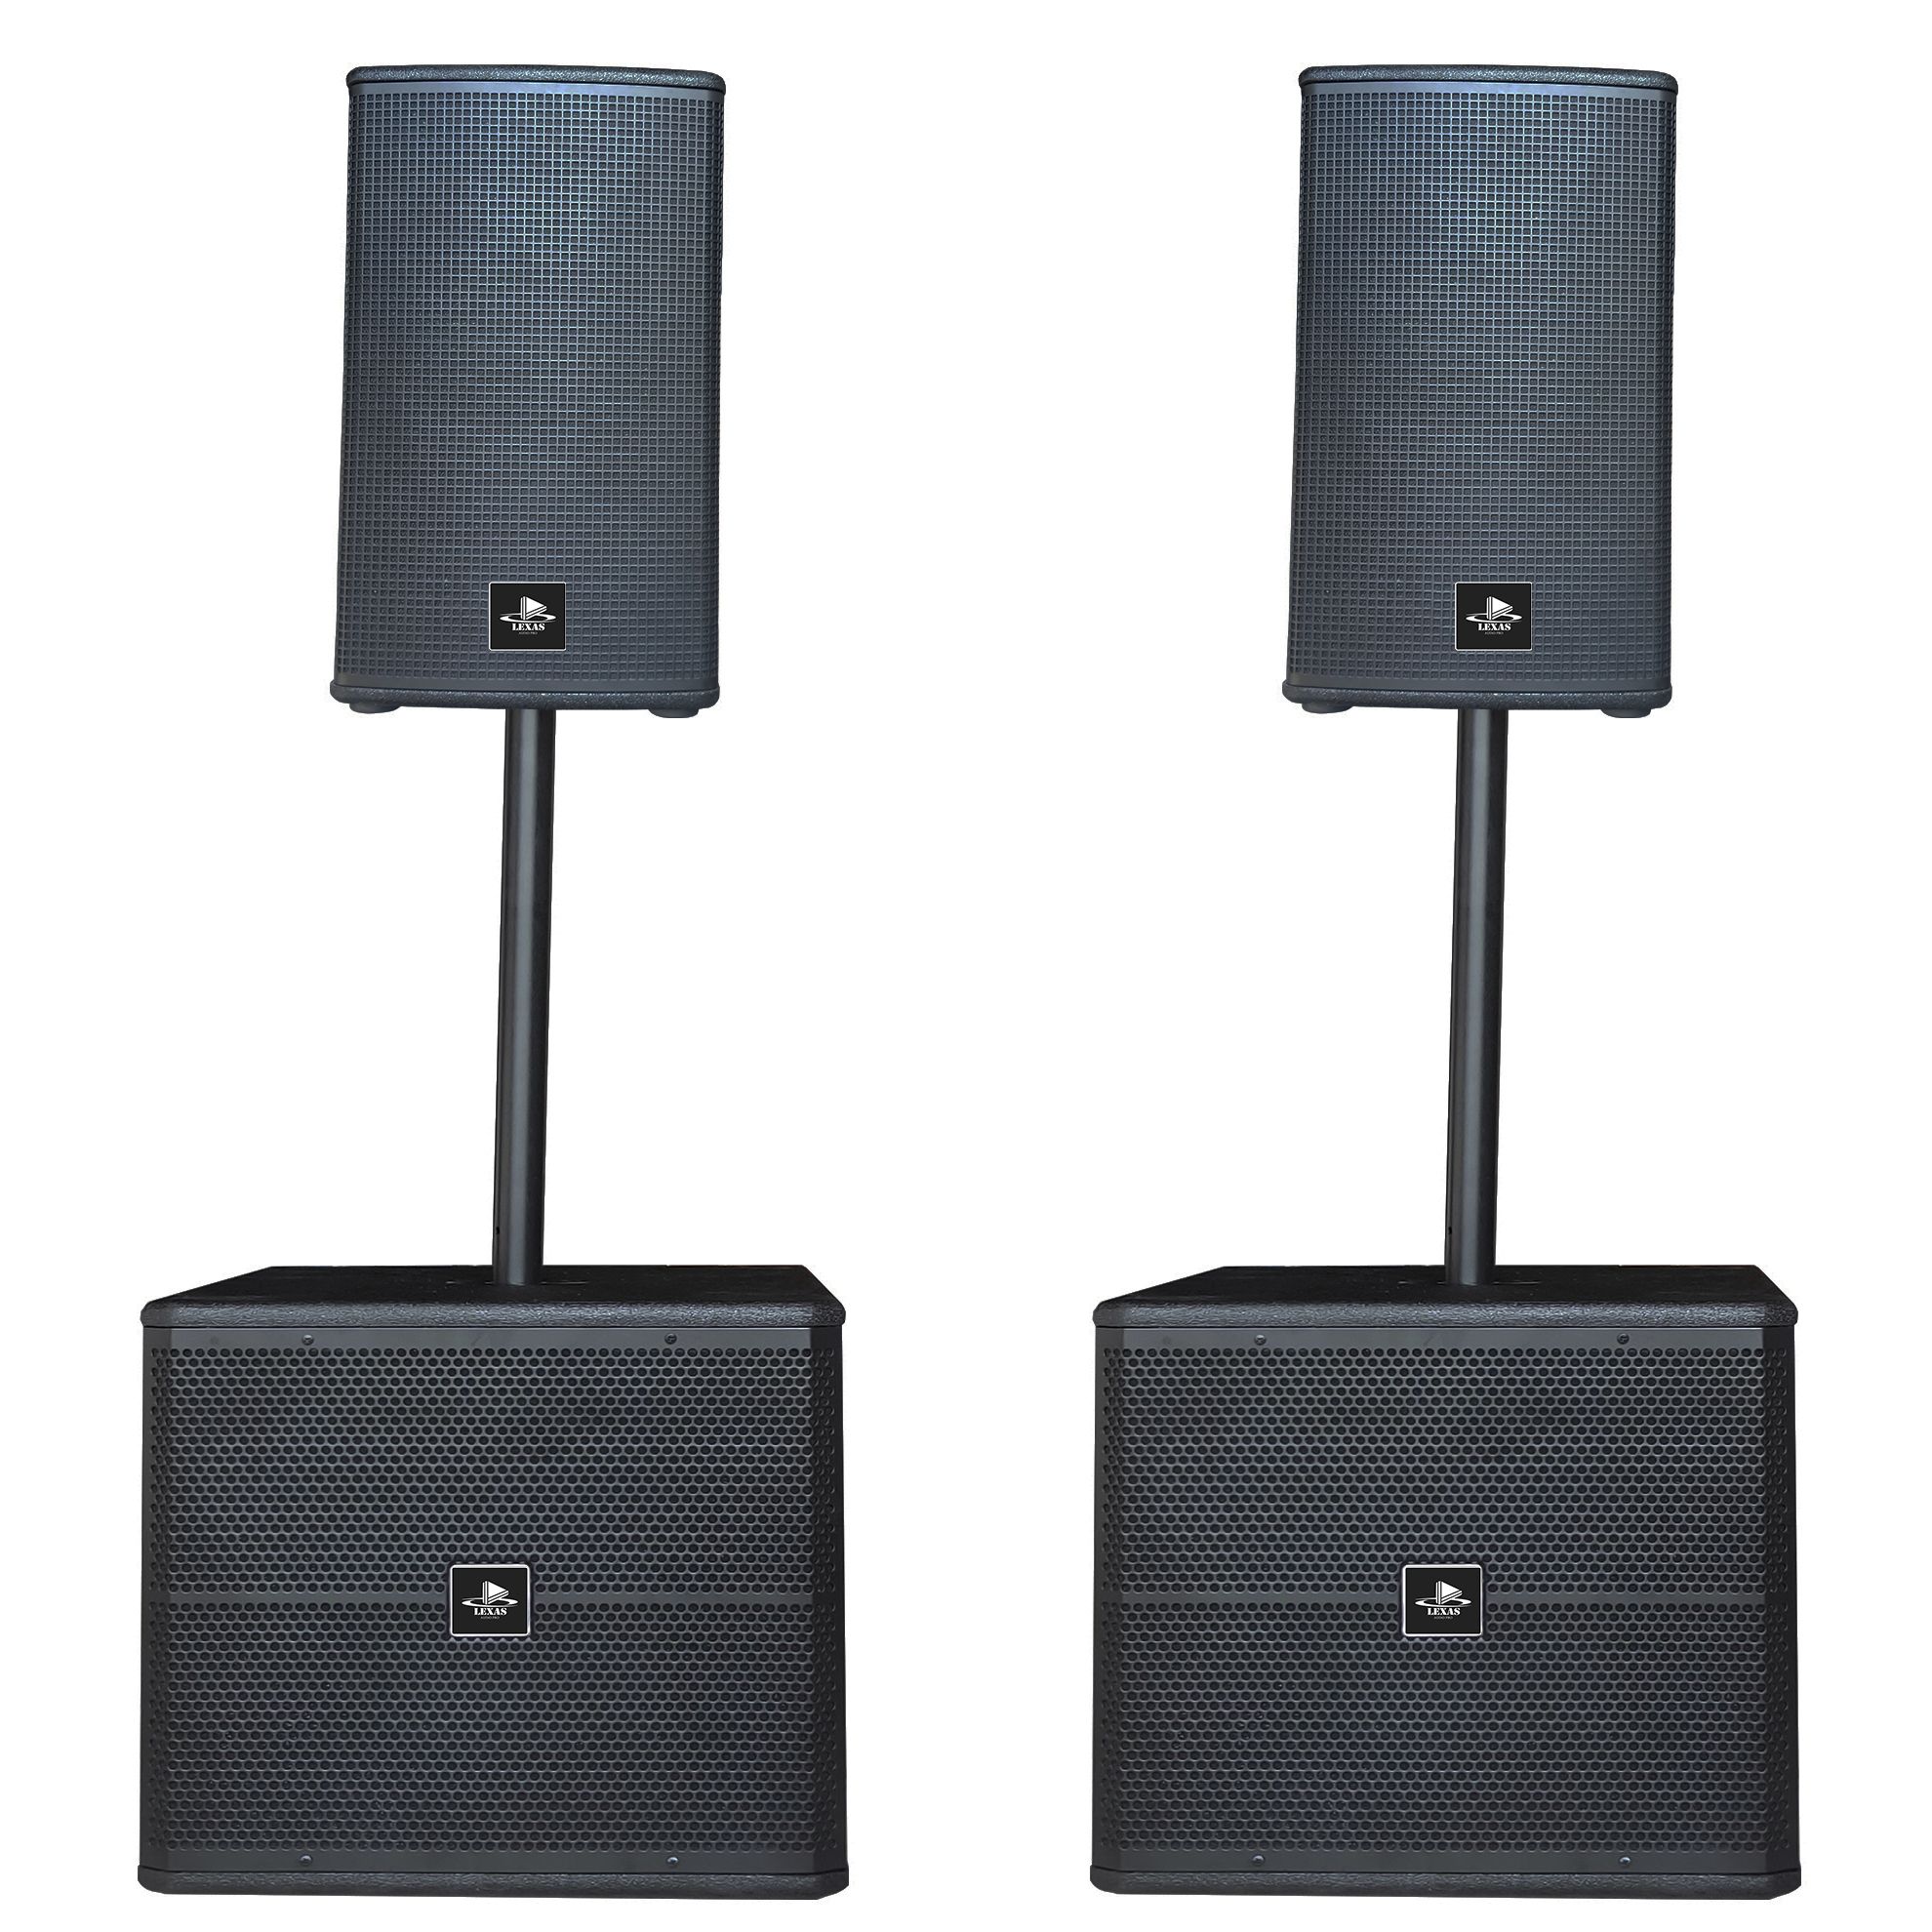 Professional Speaker Set. 2 Way Single Inch Active Subwoofer + 8 Inch From Lexasaudio, $582.92 |